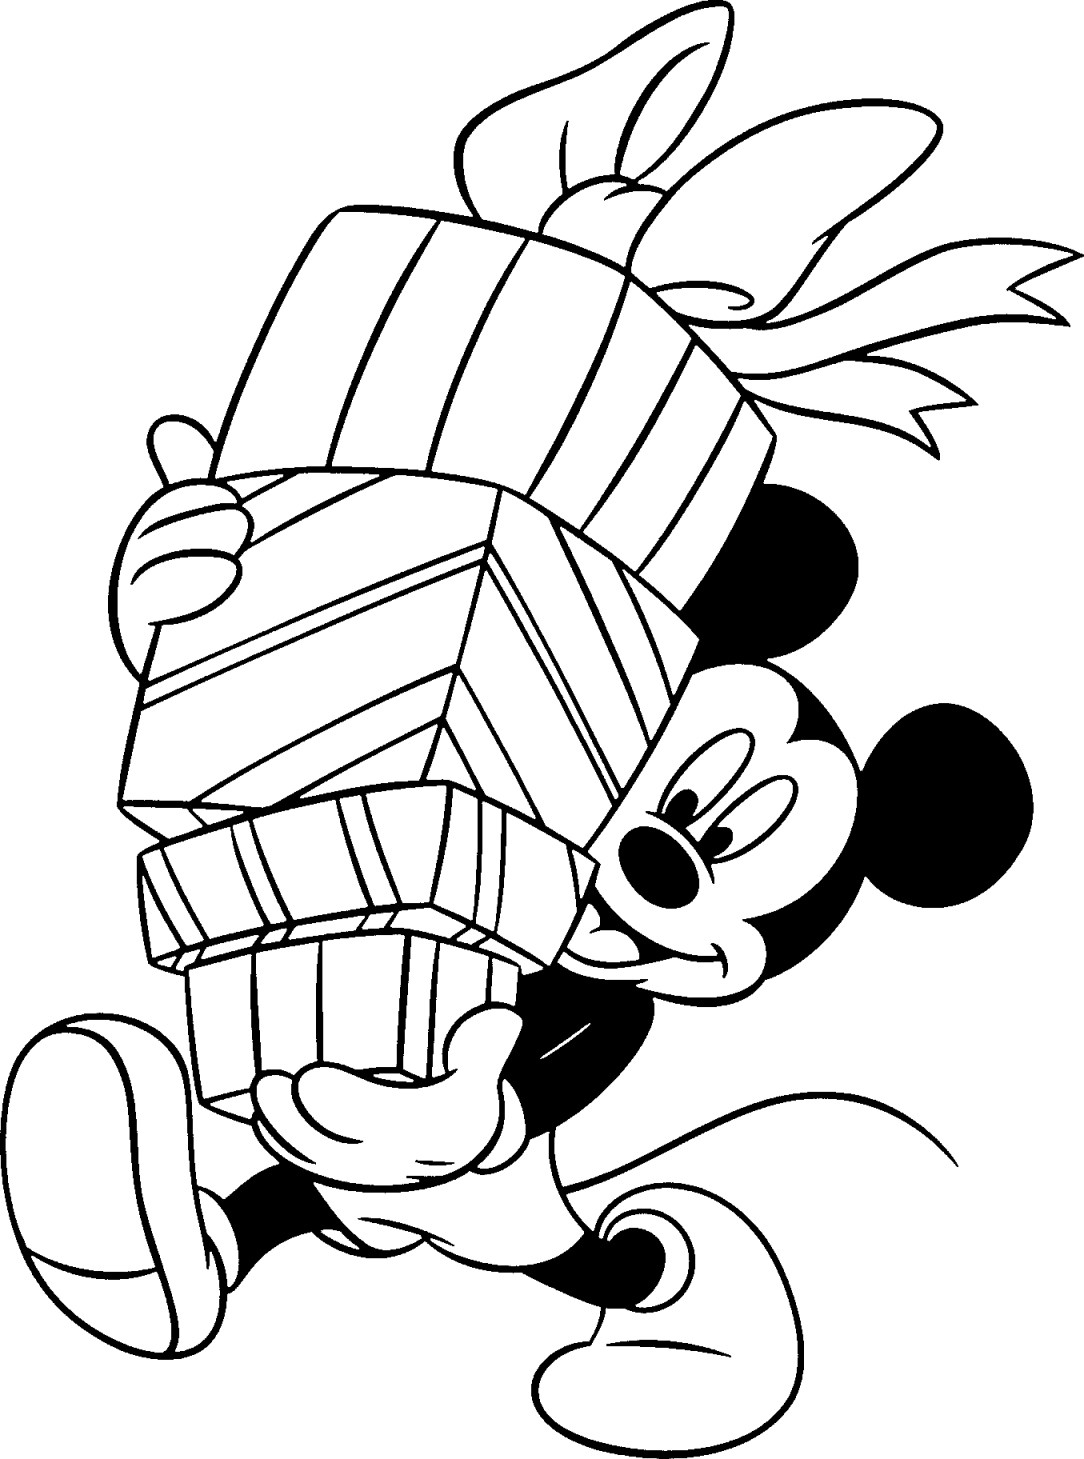 Printable Disney Coloring Pages
 Coloring Pages Christmas Disney Disney Coloring Pages